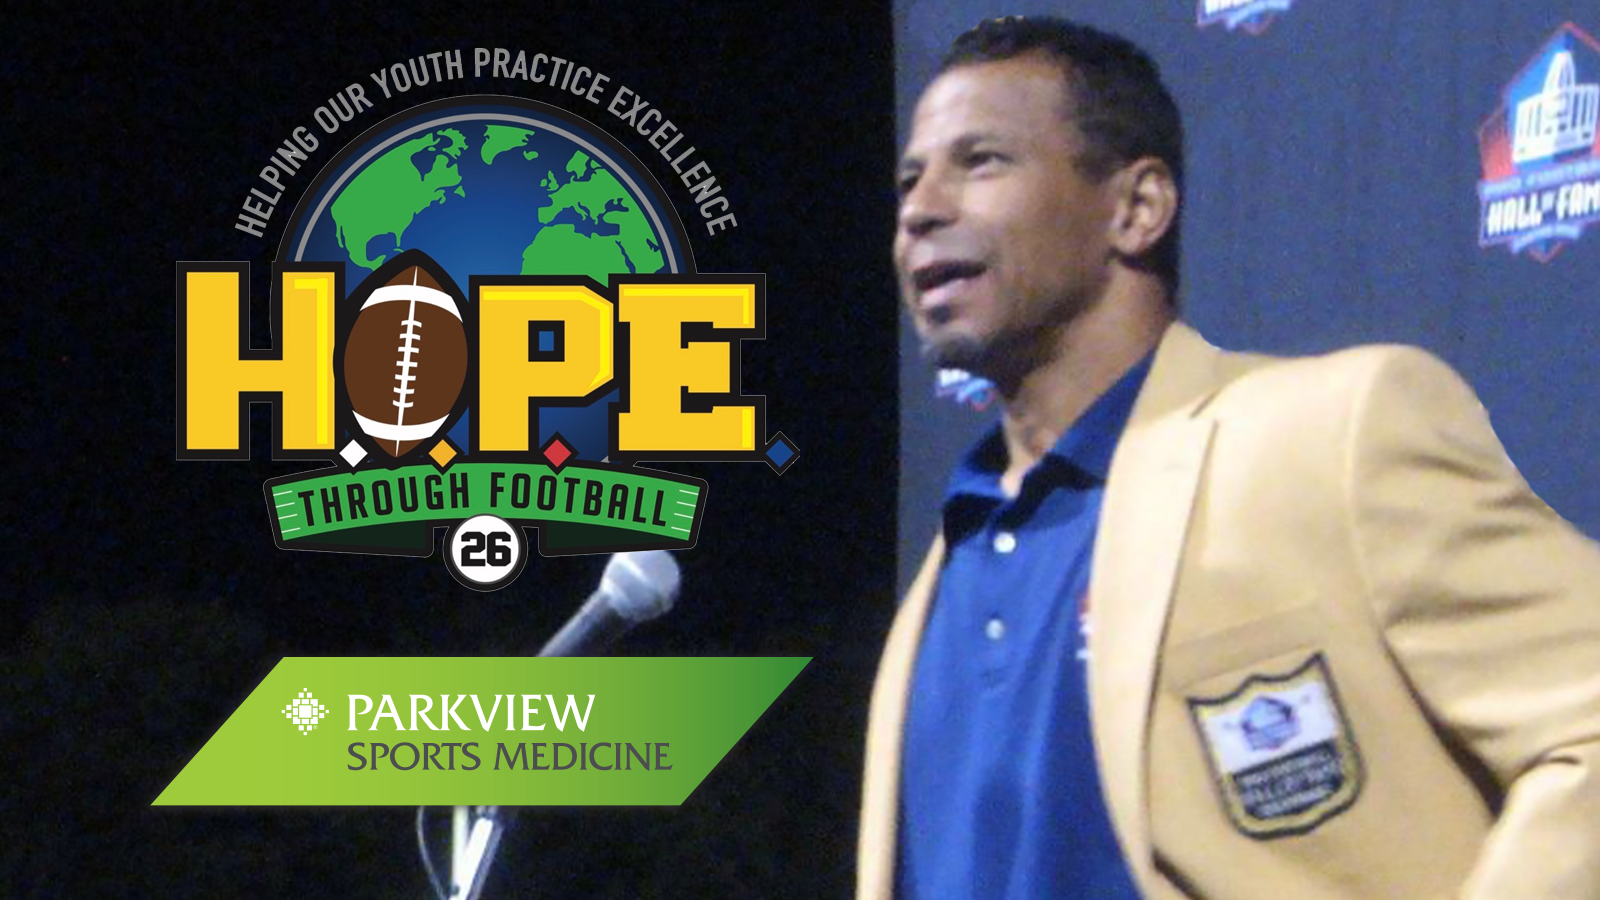 Rod Woodson's HOPE Through Football Clinic announces Parkview Sports Medicine as title sponsor, offers discounted registration